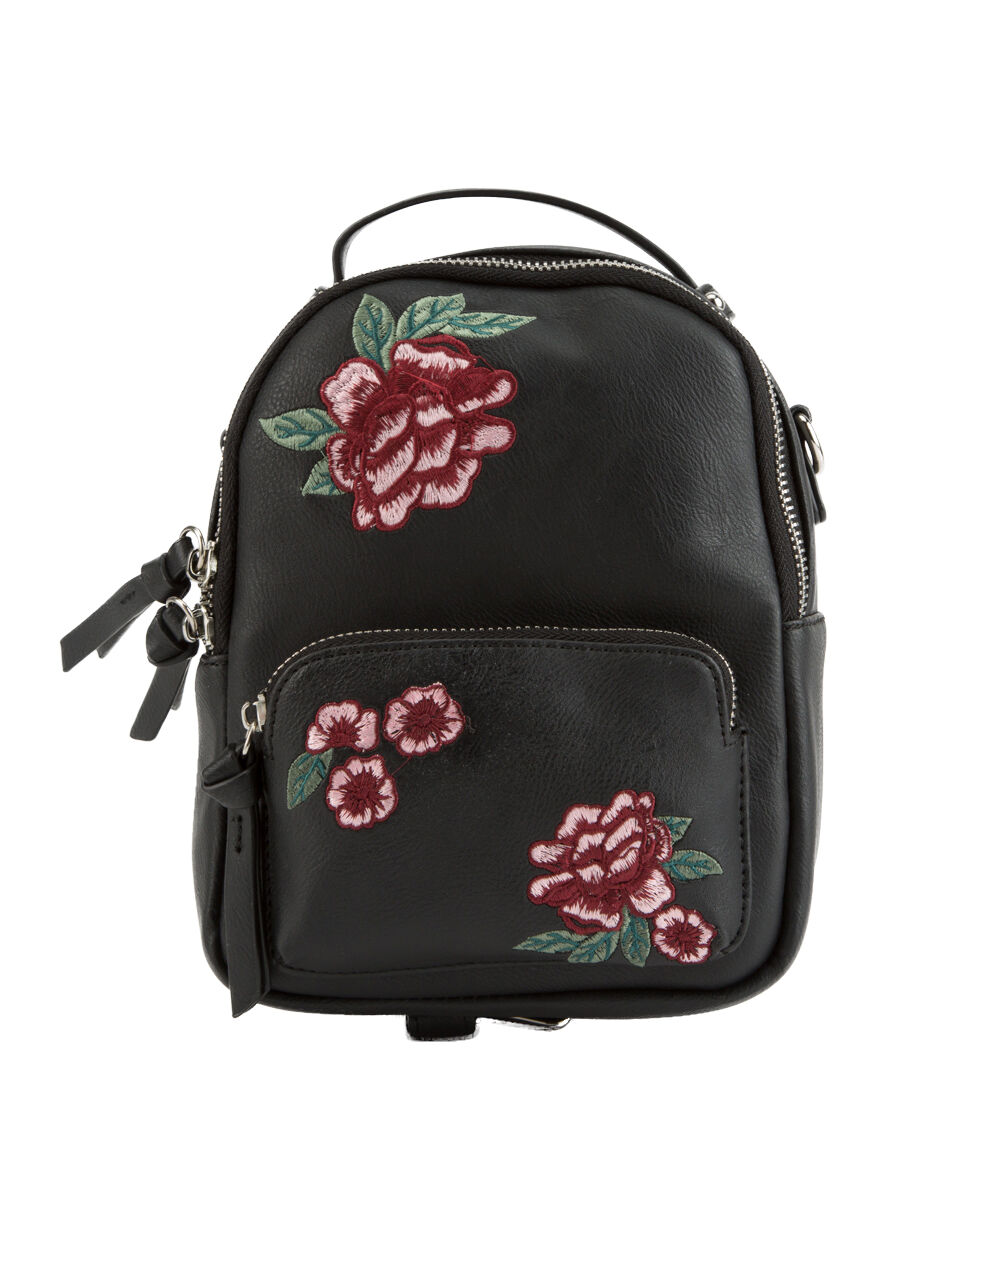 VIOLET RAY TRINITY ROSE MINI BACKPACK